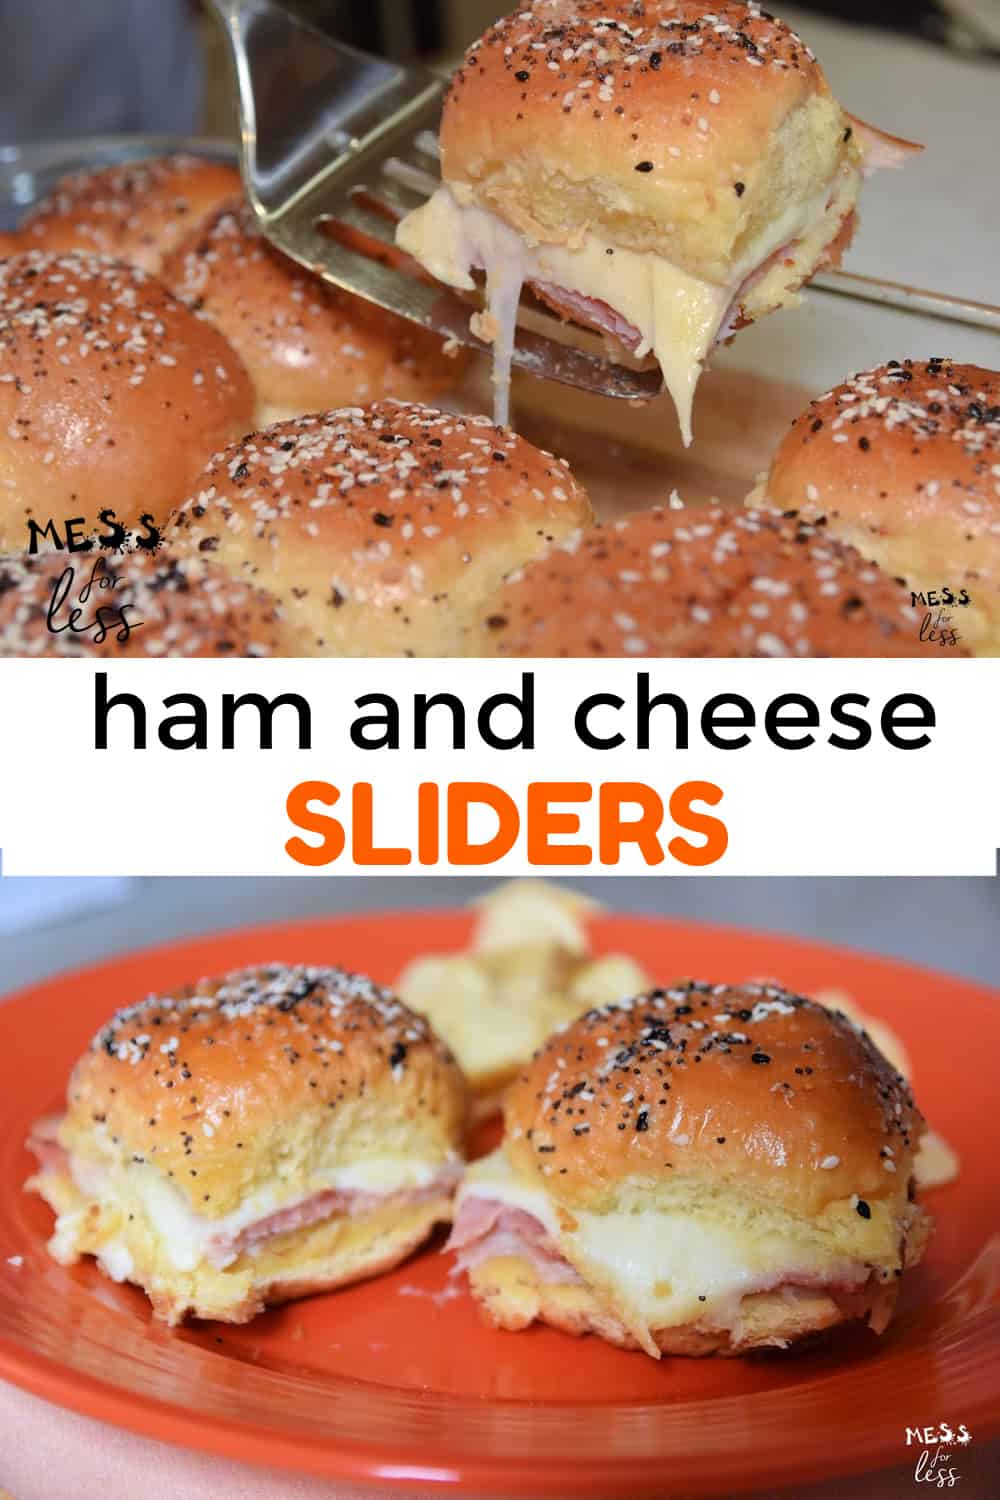 These ham and cheese sliders are filled with yummy meat and gooey cheese stuffed in soft buttered buns. Such an easy meal or appetizer idea! 